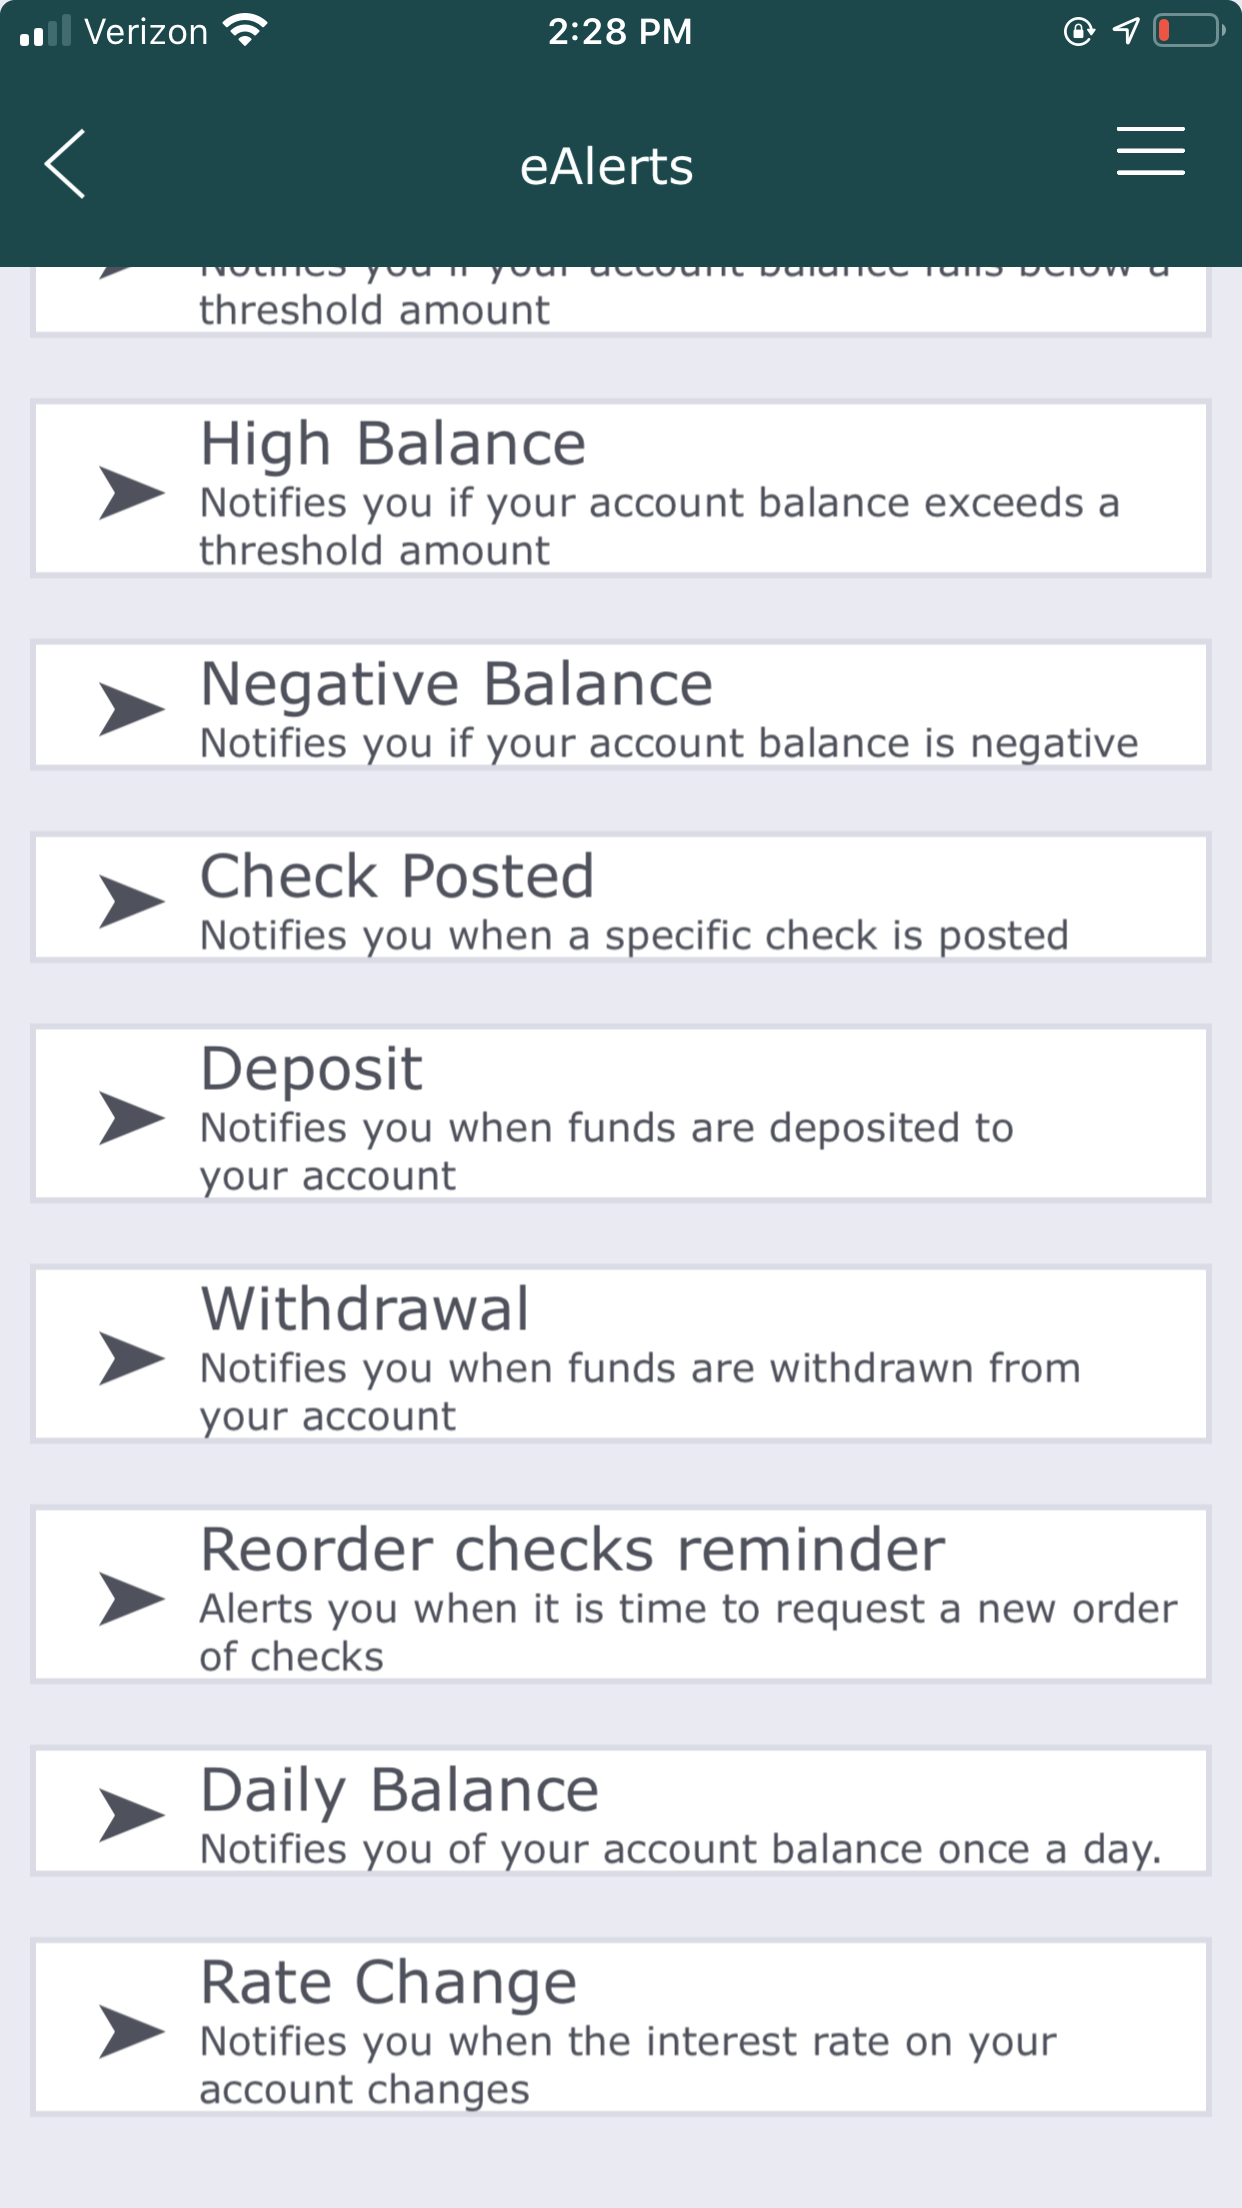 eAlert notification types including: High Balance, Negative Balance, Check Posted, Deposit, Withdrawal, Reorder Checks Reminder, Daily Balance, and Rate Change